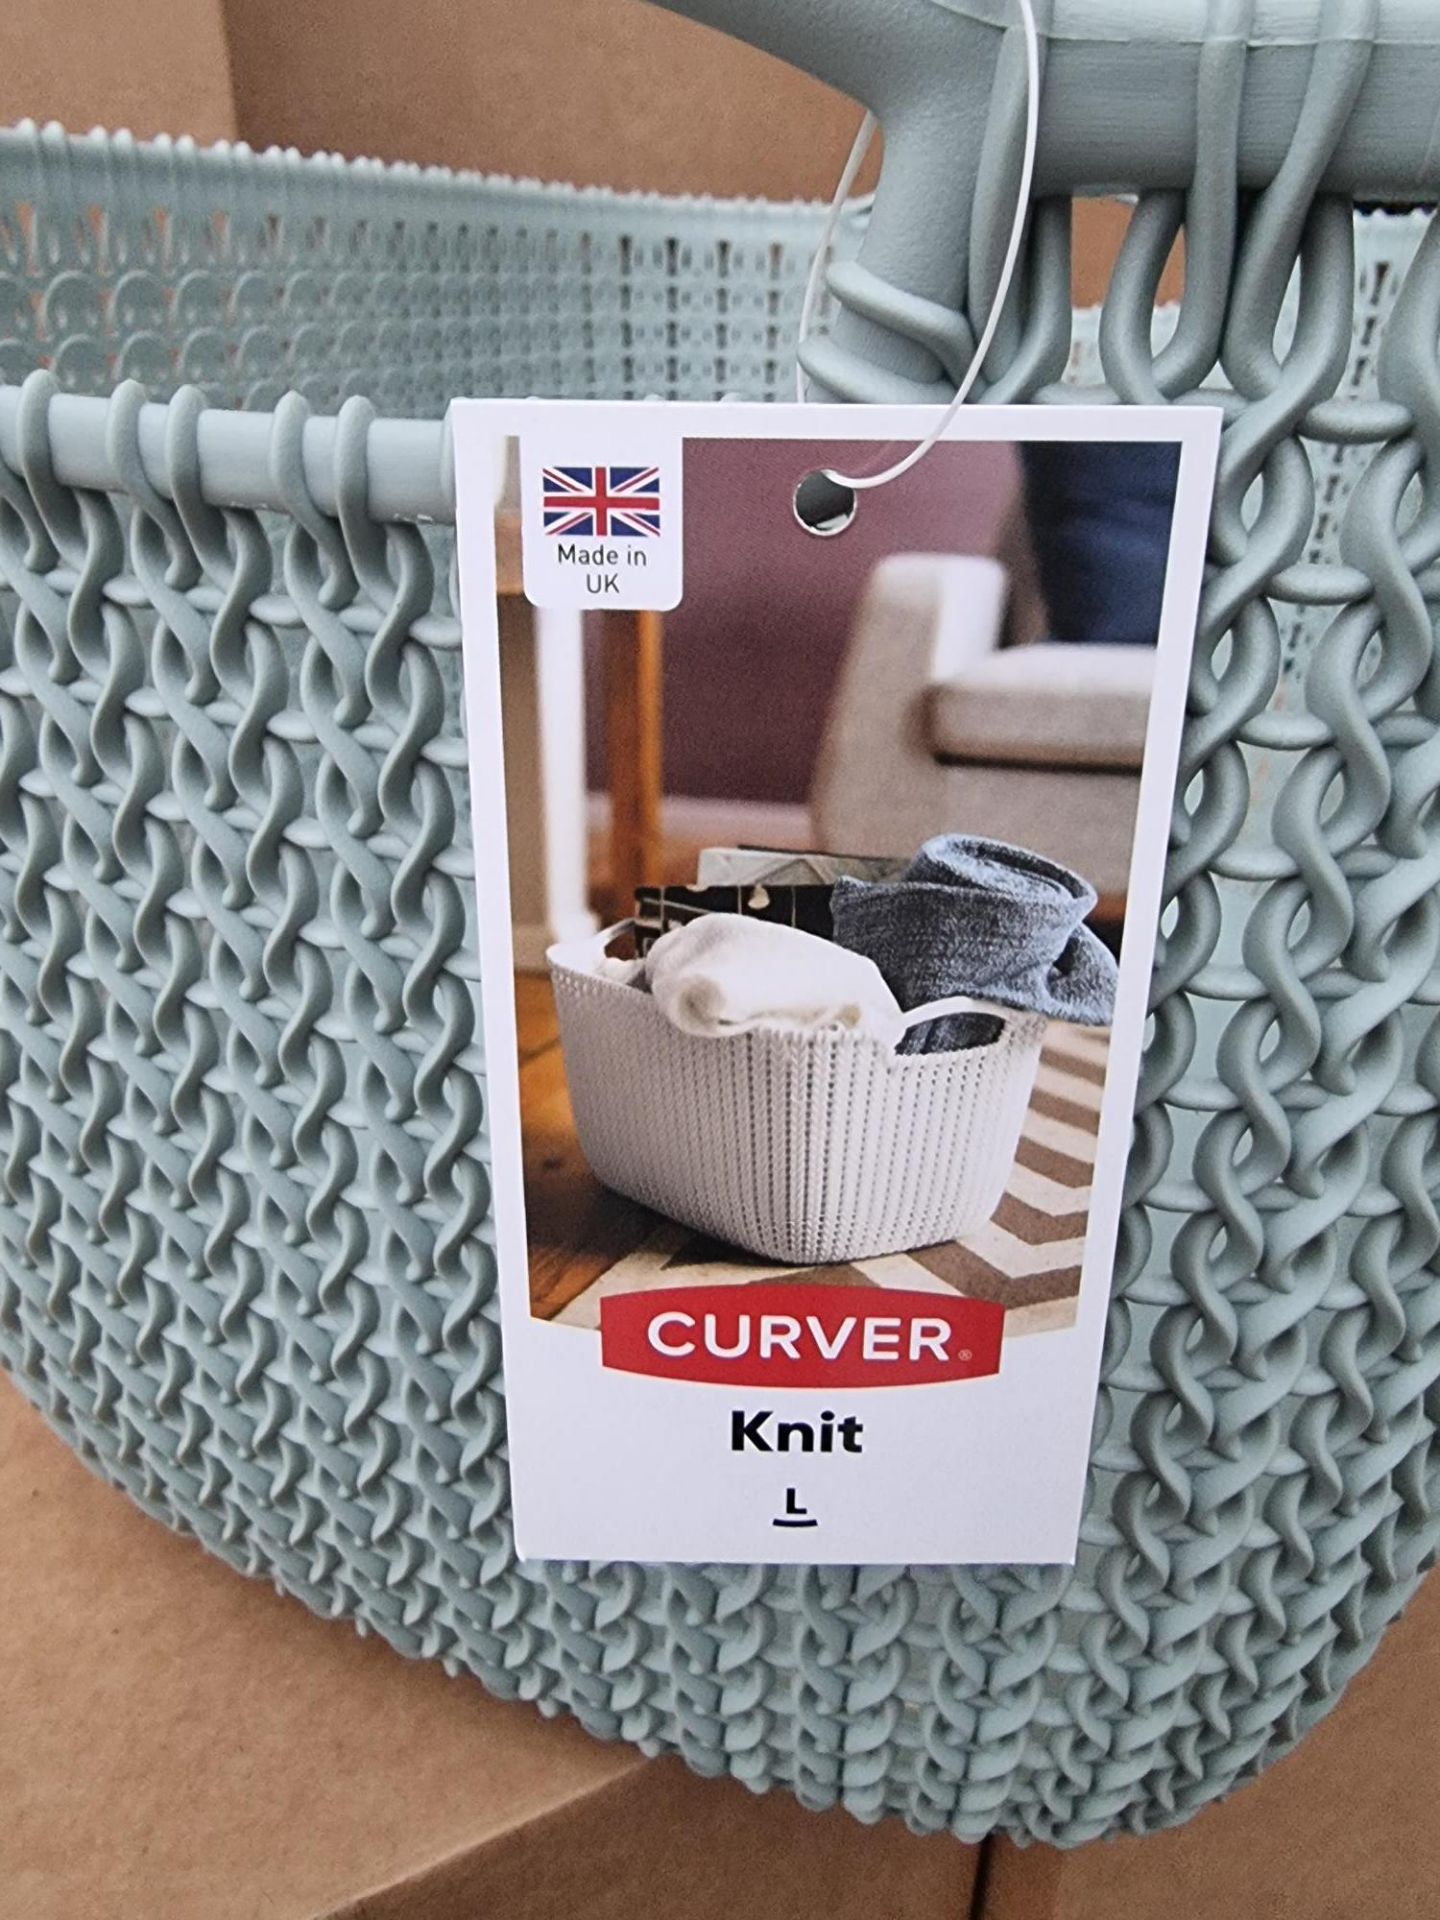 PALLET TO CONTAIN 100 X NEW PACKAGED Curver Knit Rectangular Storage Basket - 19 Litres, Misty Blue. - Image 3 of 36